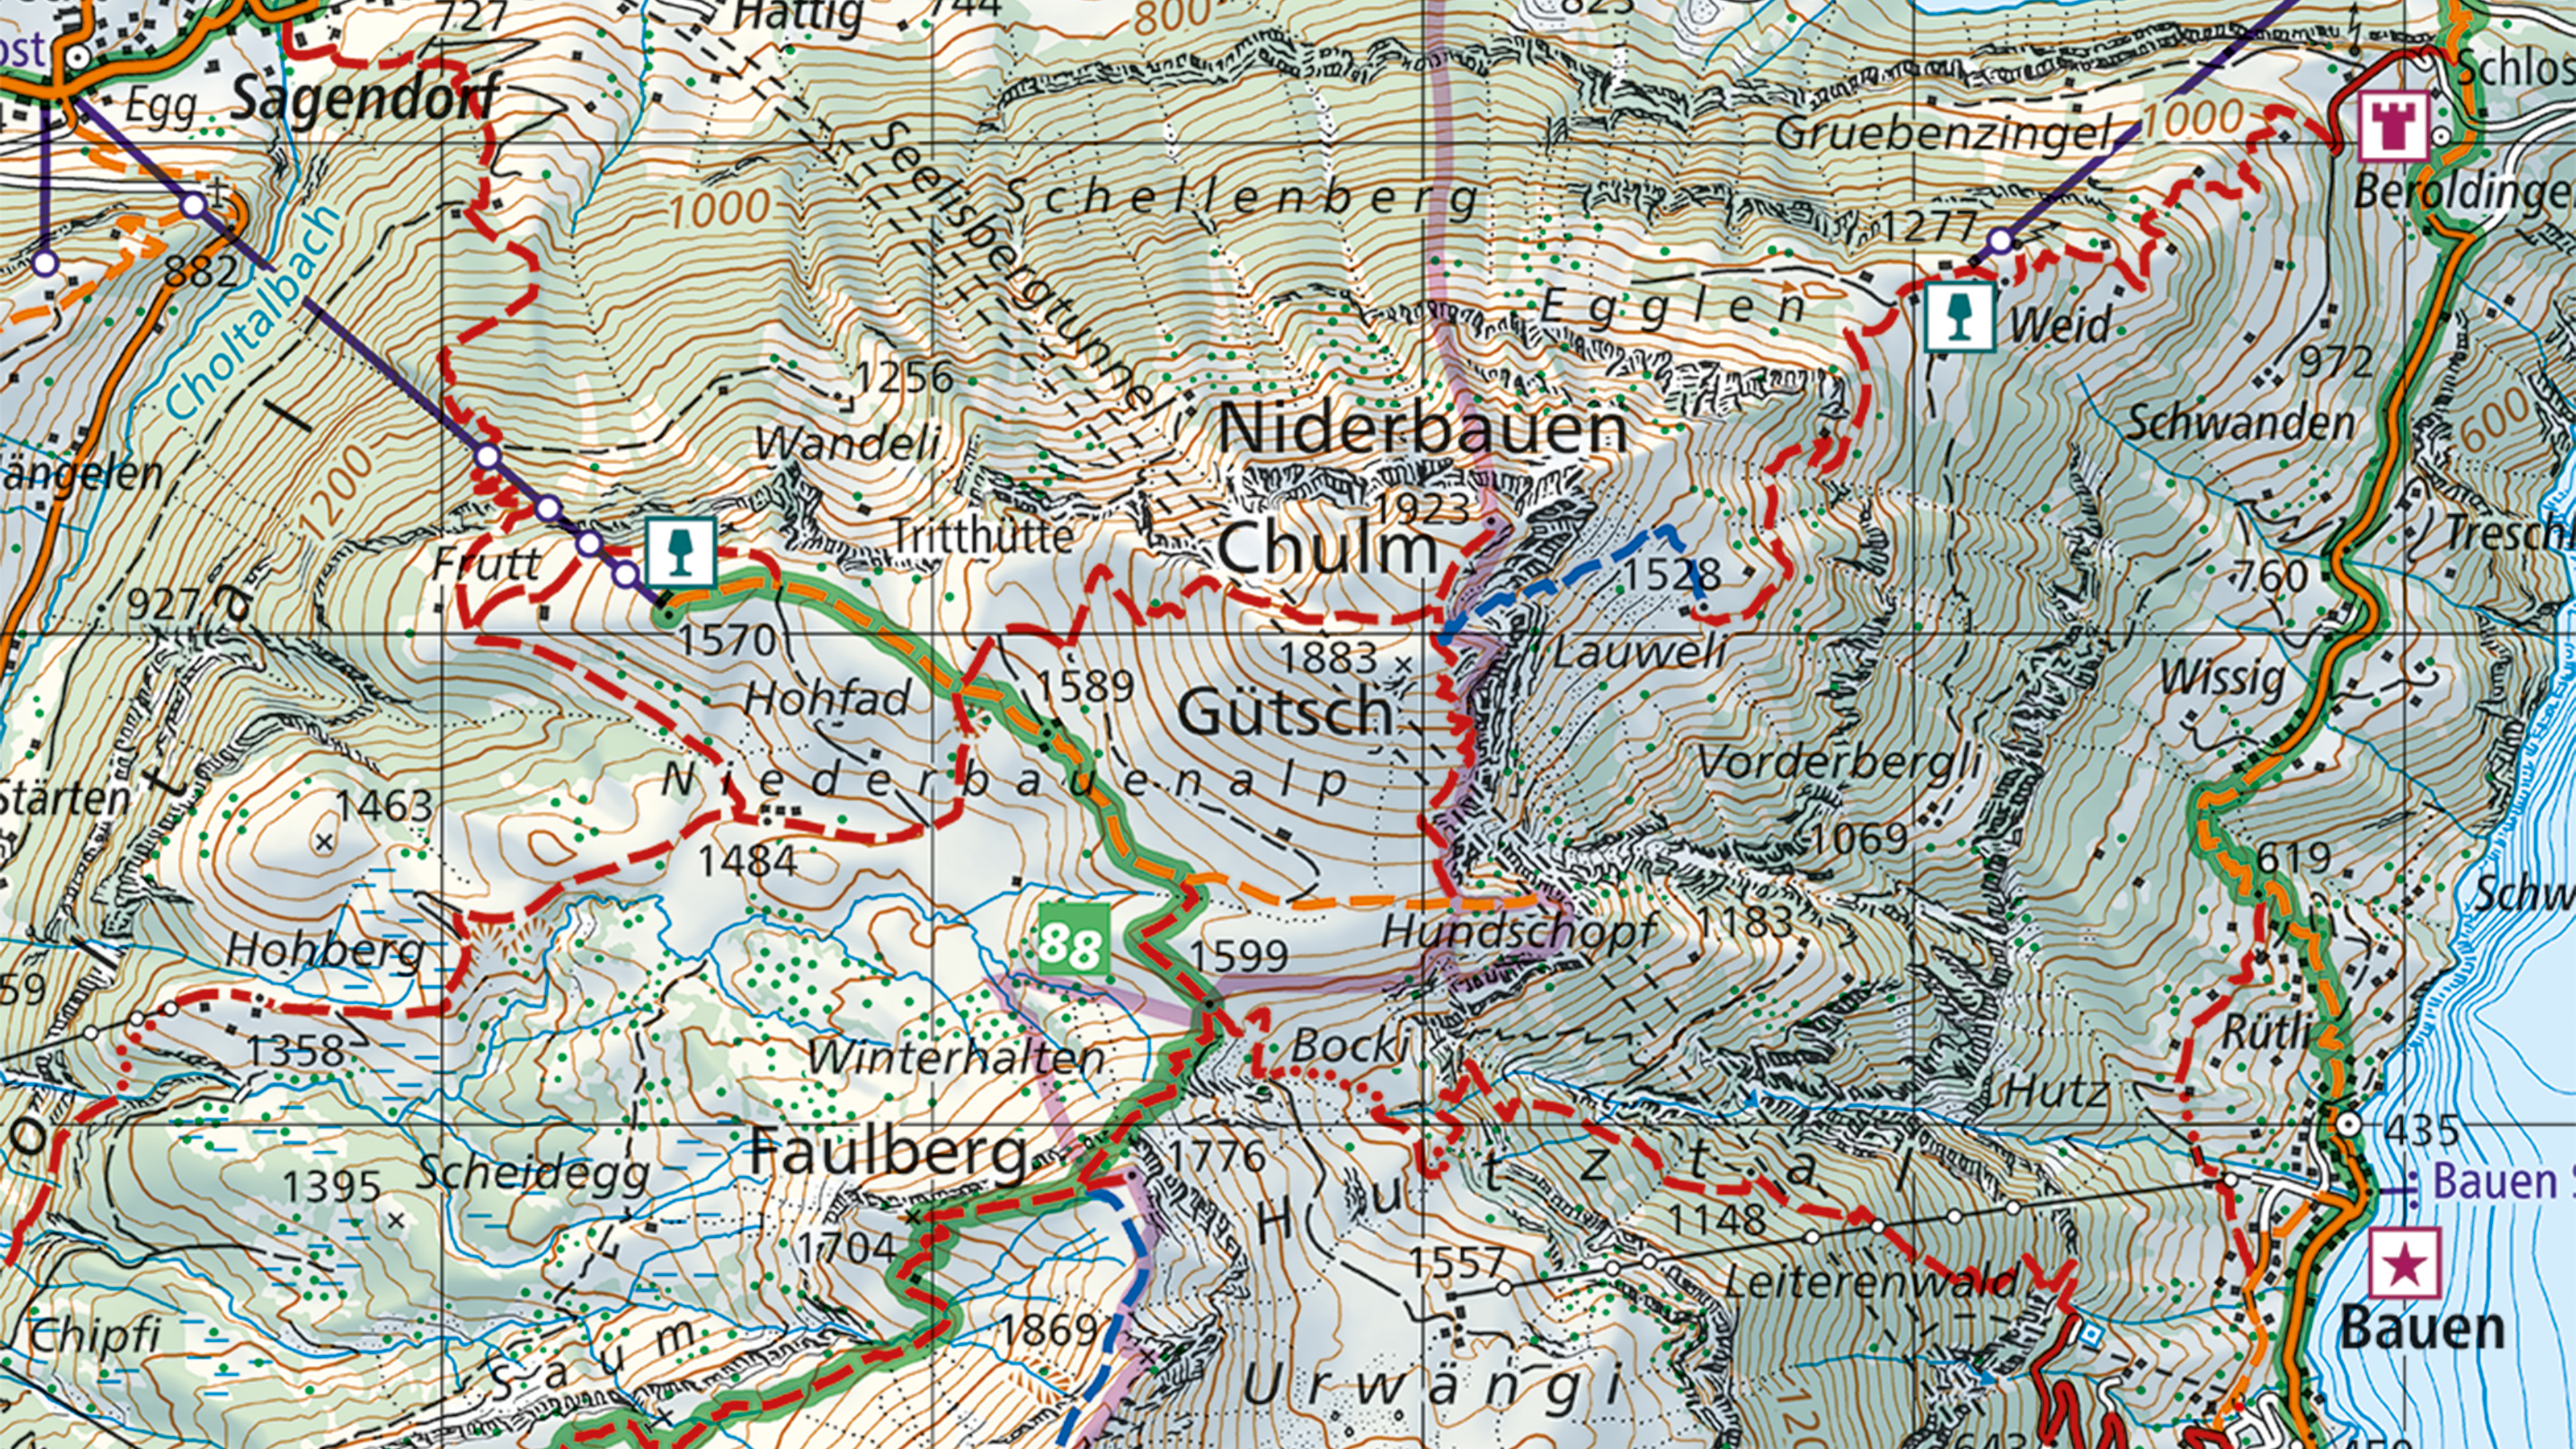 Hiking map with thematic content